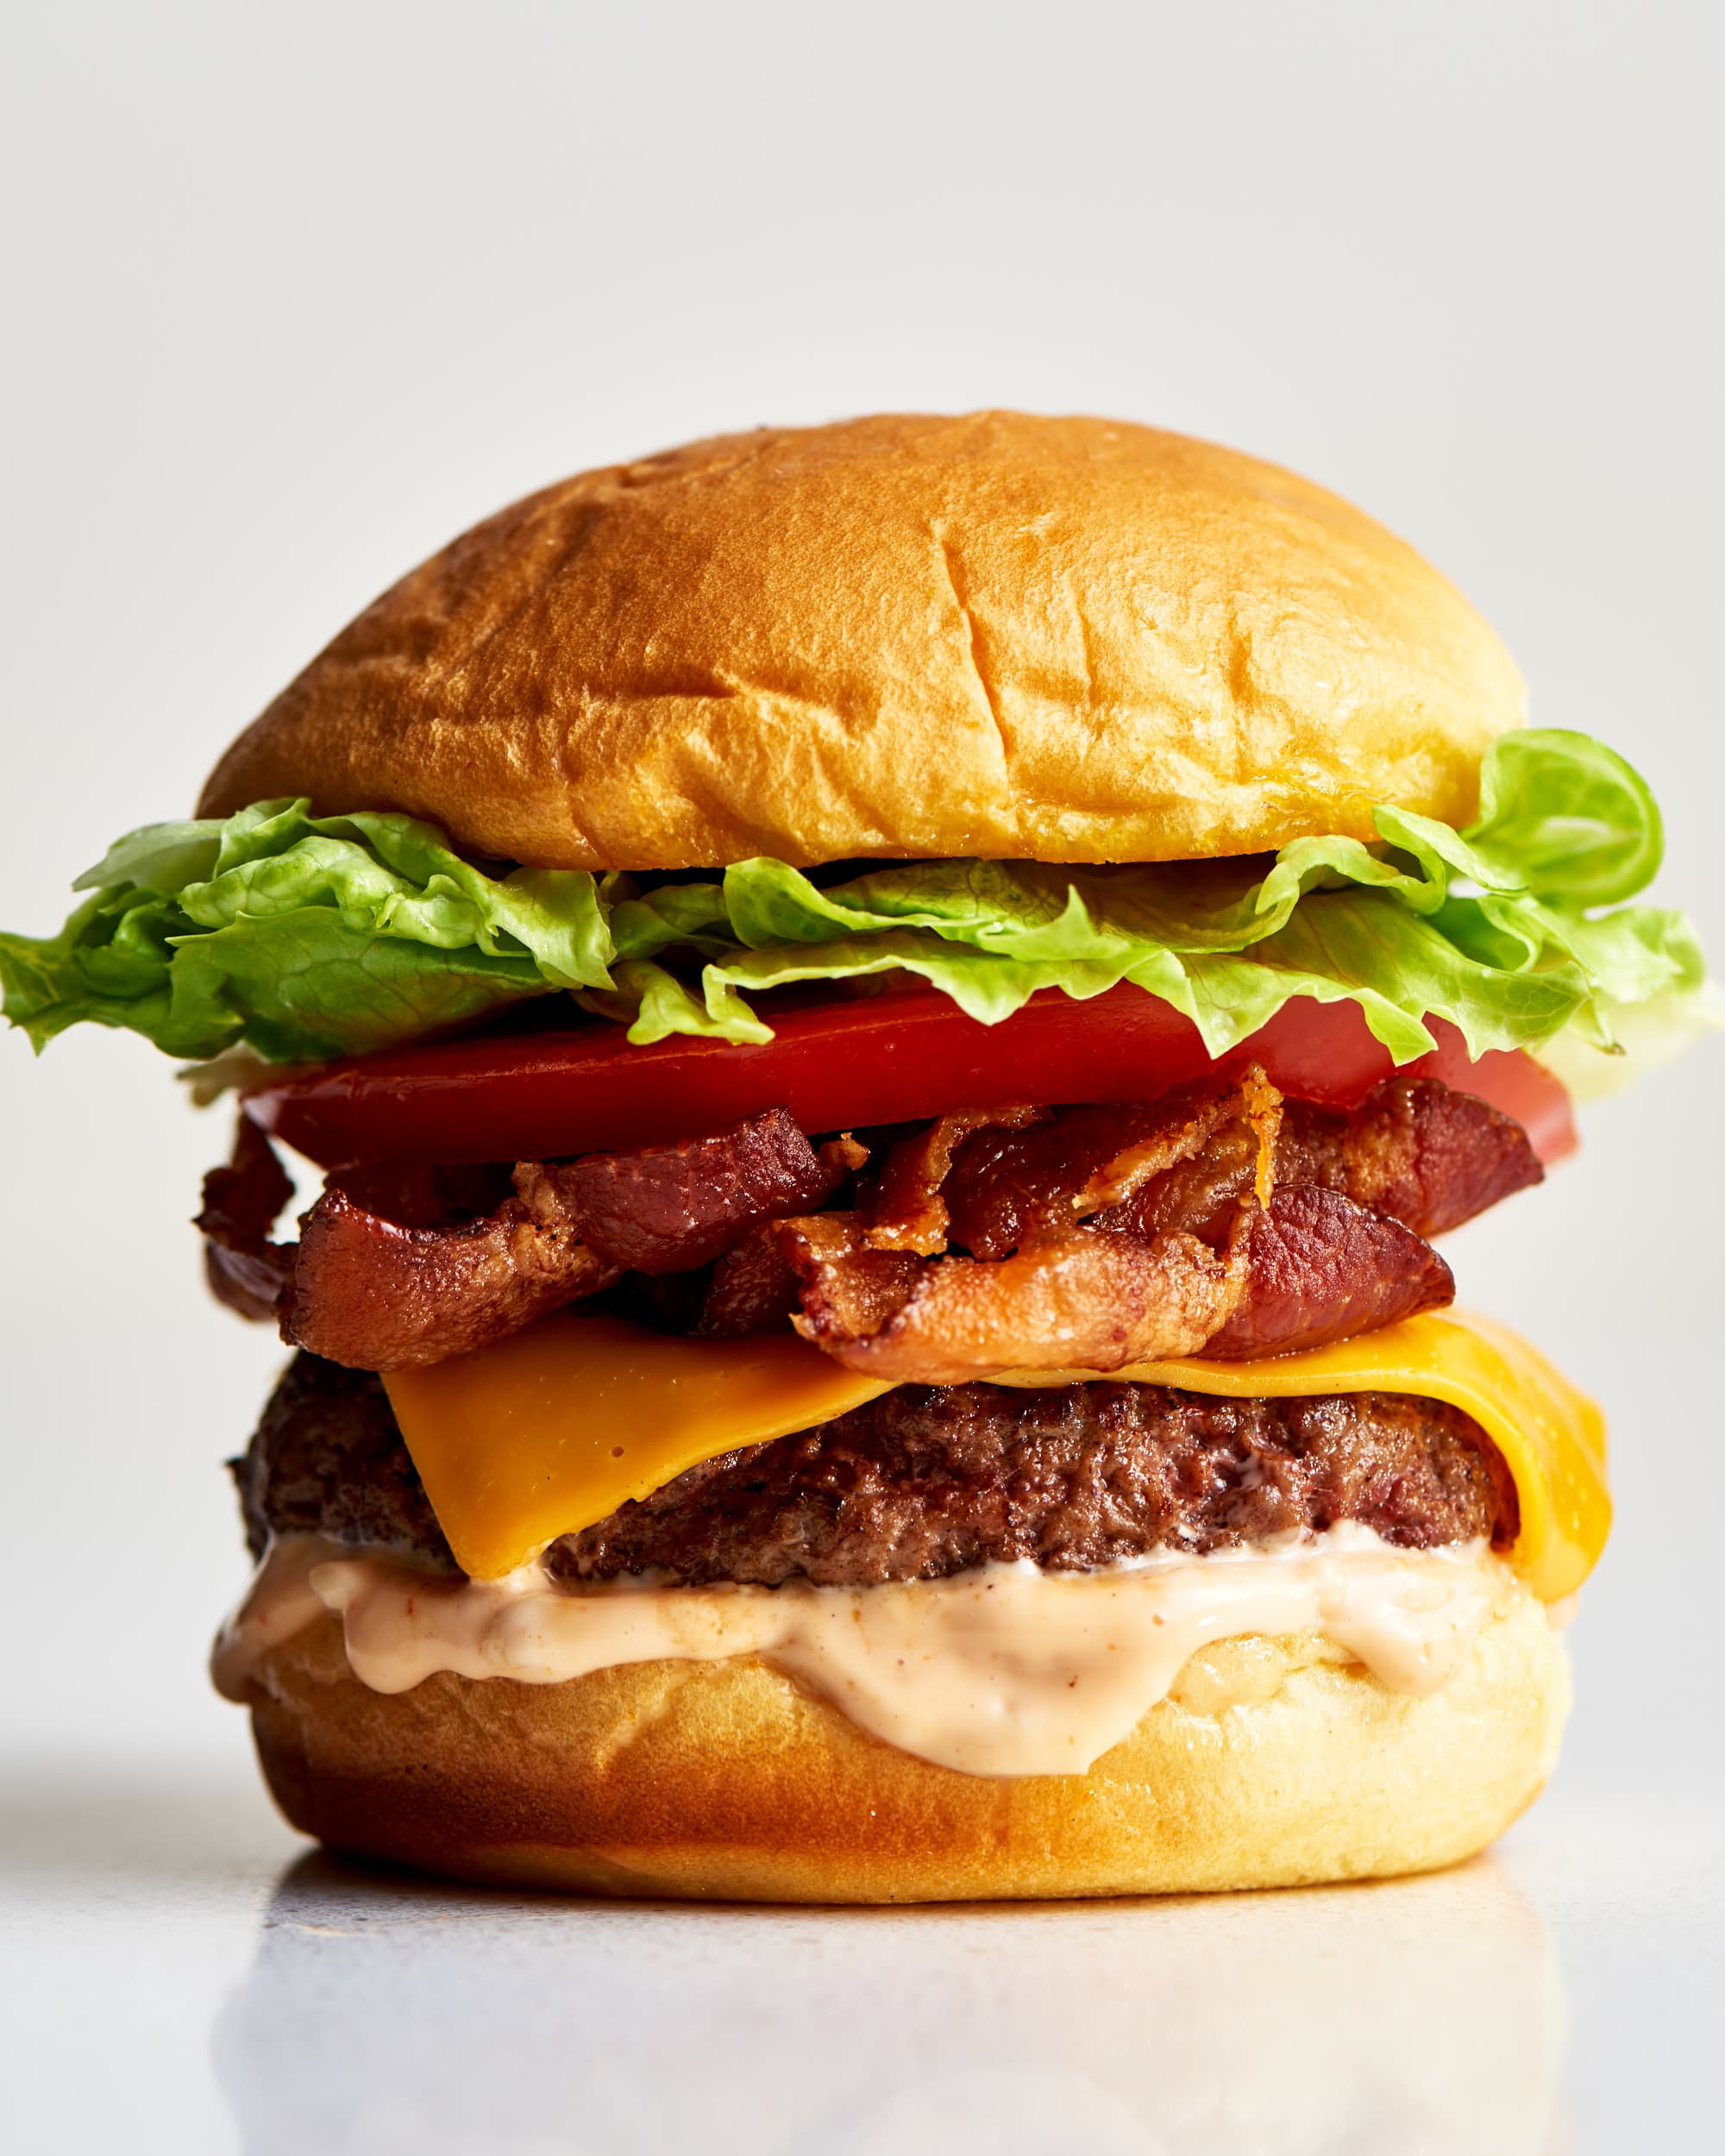 The Ultimate Bacon Cheeseburger Recipe (With Special Sauce)